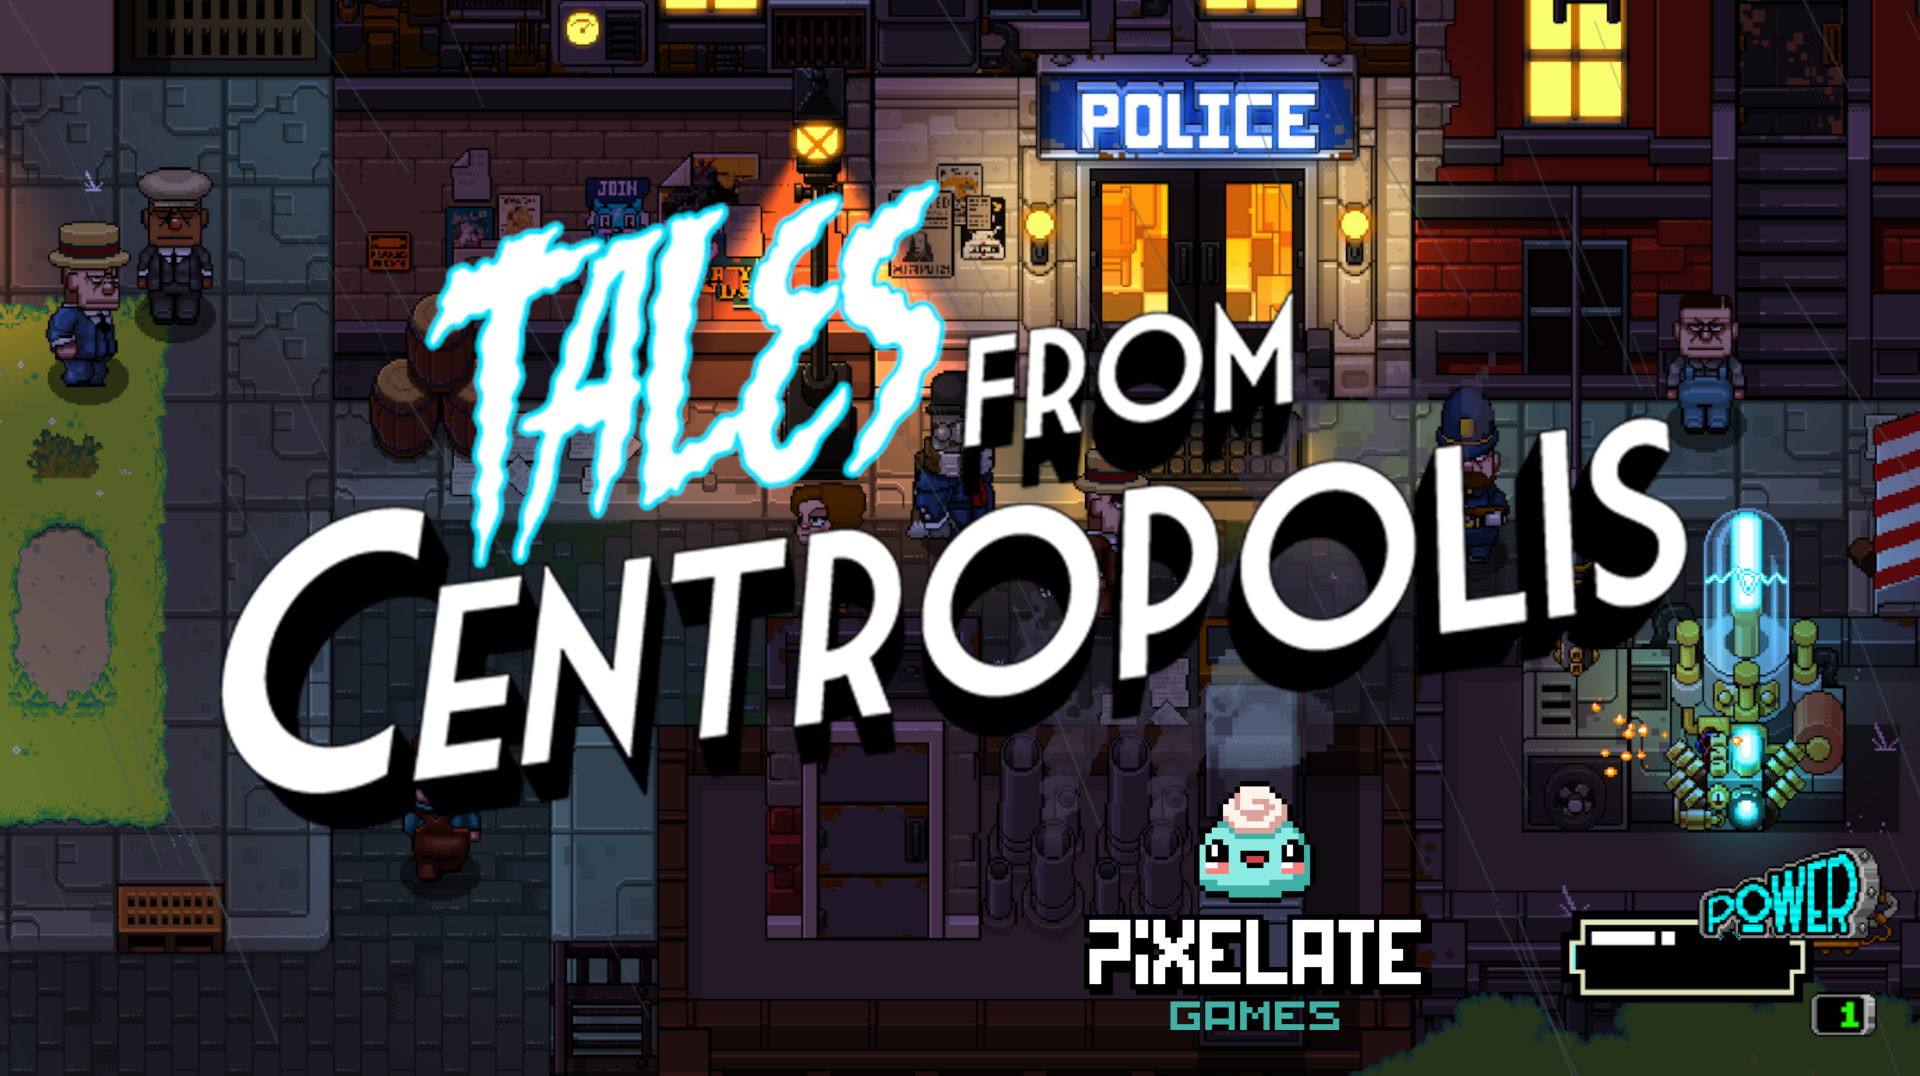 Pixelate Games Launches Tales from Centropolis on Kickstarter!